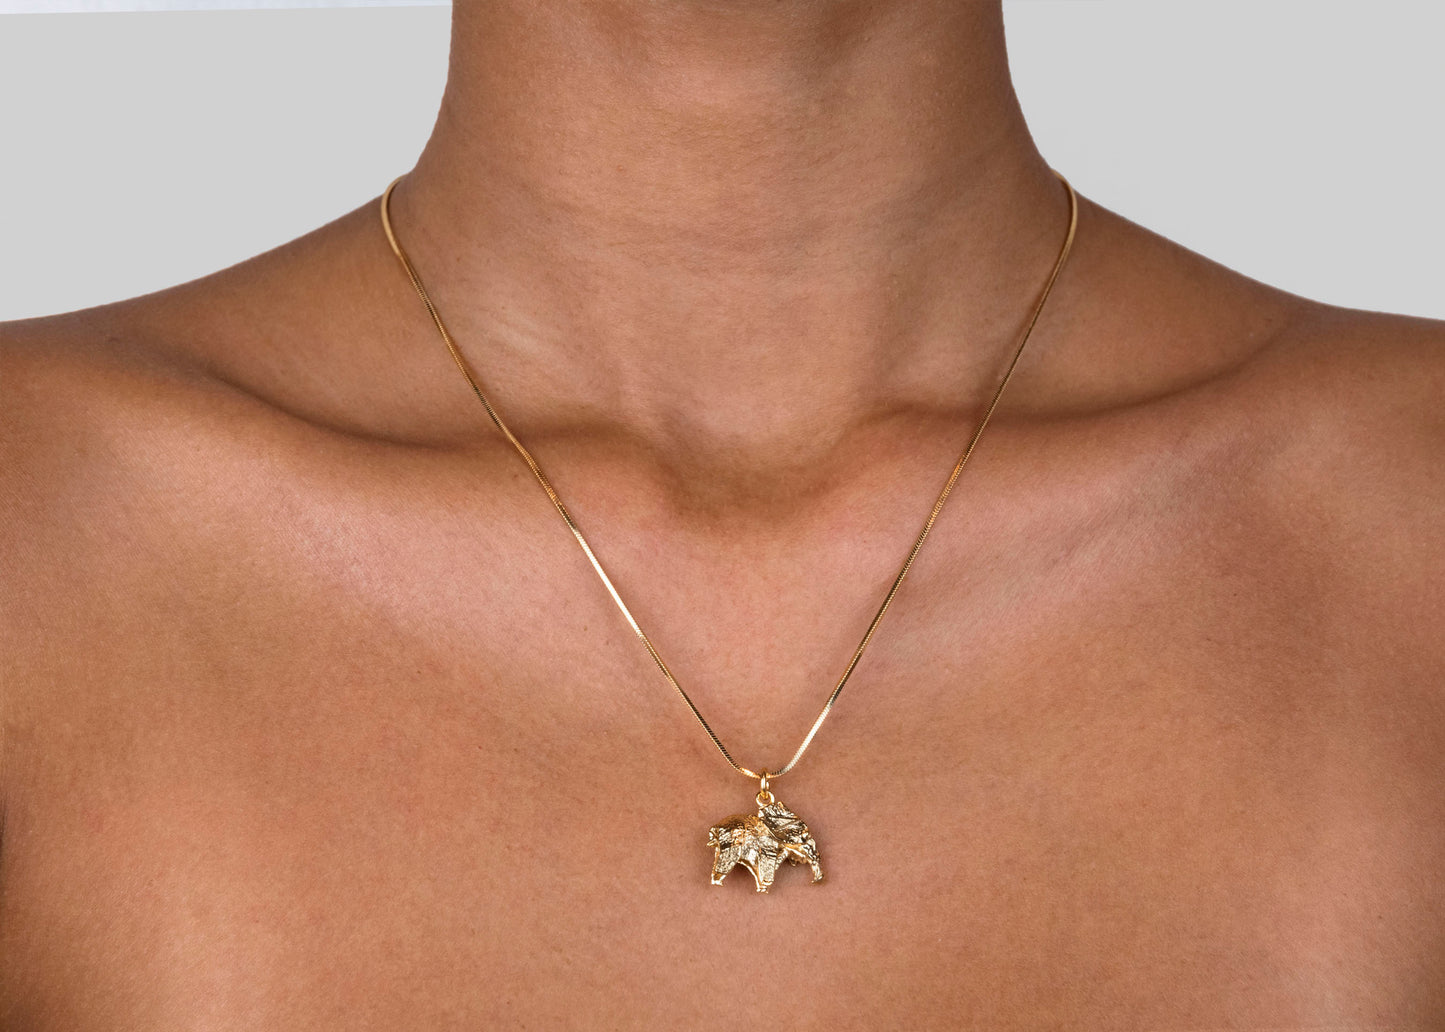 Elephant Origami with Snake Chain Necklace